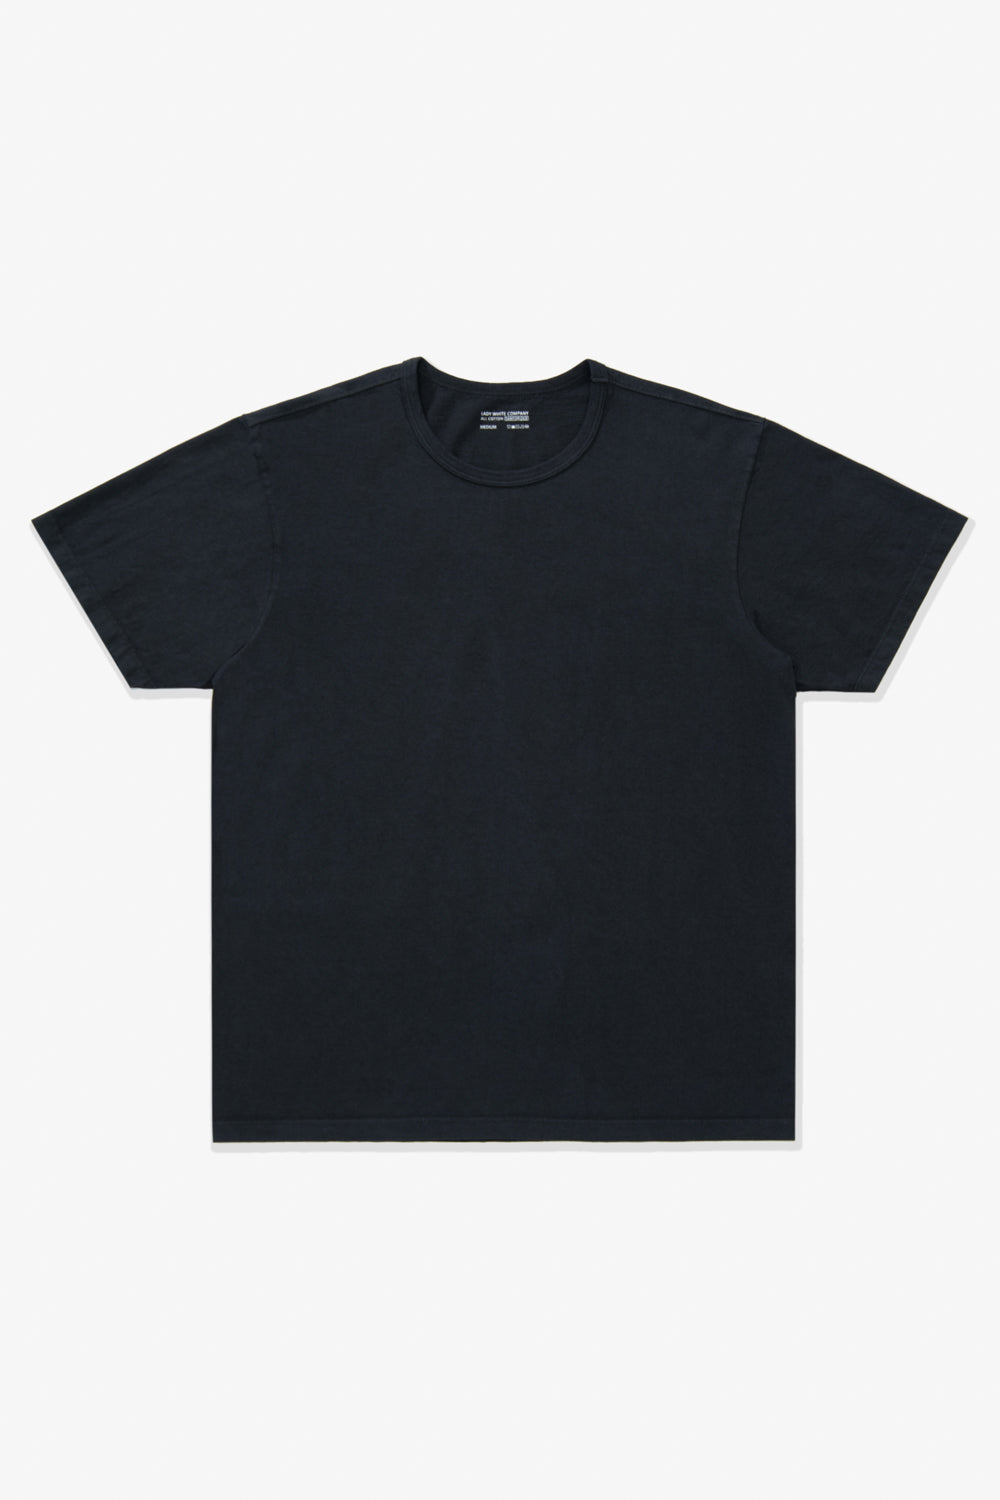 OUR T-SHIRT - CHARCOAL – LADY WHITE CO.